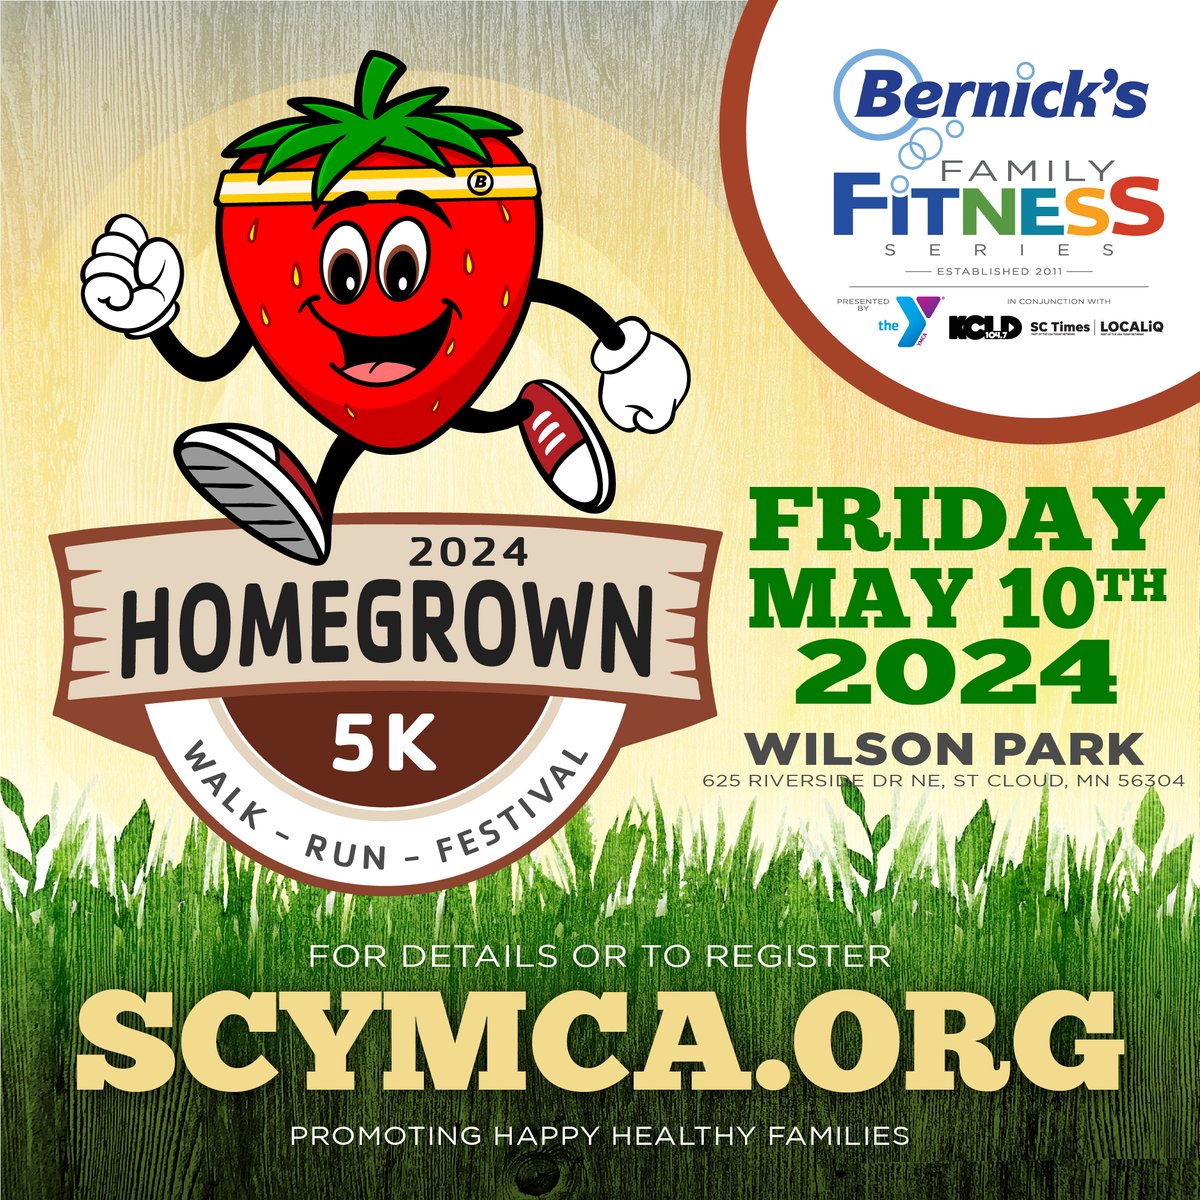 🏃‍♀️🏃‍♂️ Have you signed up yet for the Homegrown 5K and Festival at Wilson Park? Enjoy a craft fair and farmers market, paired with a FREE community concert. All of this centered around our 5K, 2 Mile, and Kids Run. Register now: bernicks.co/4aAlQ4T